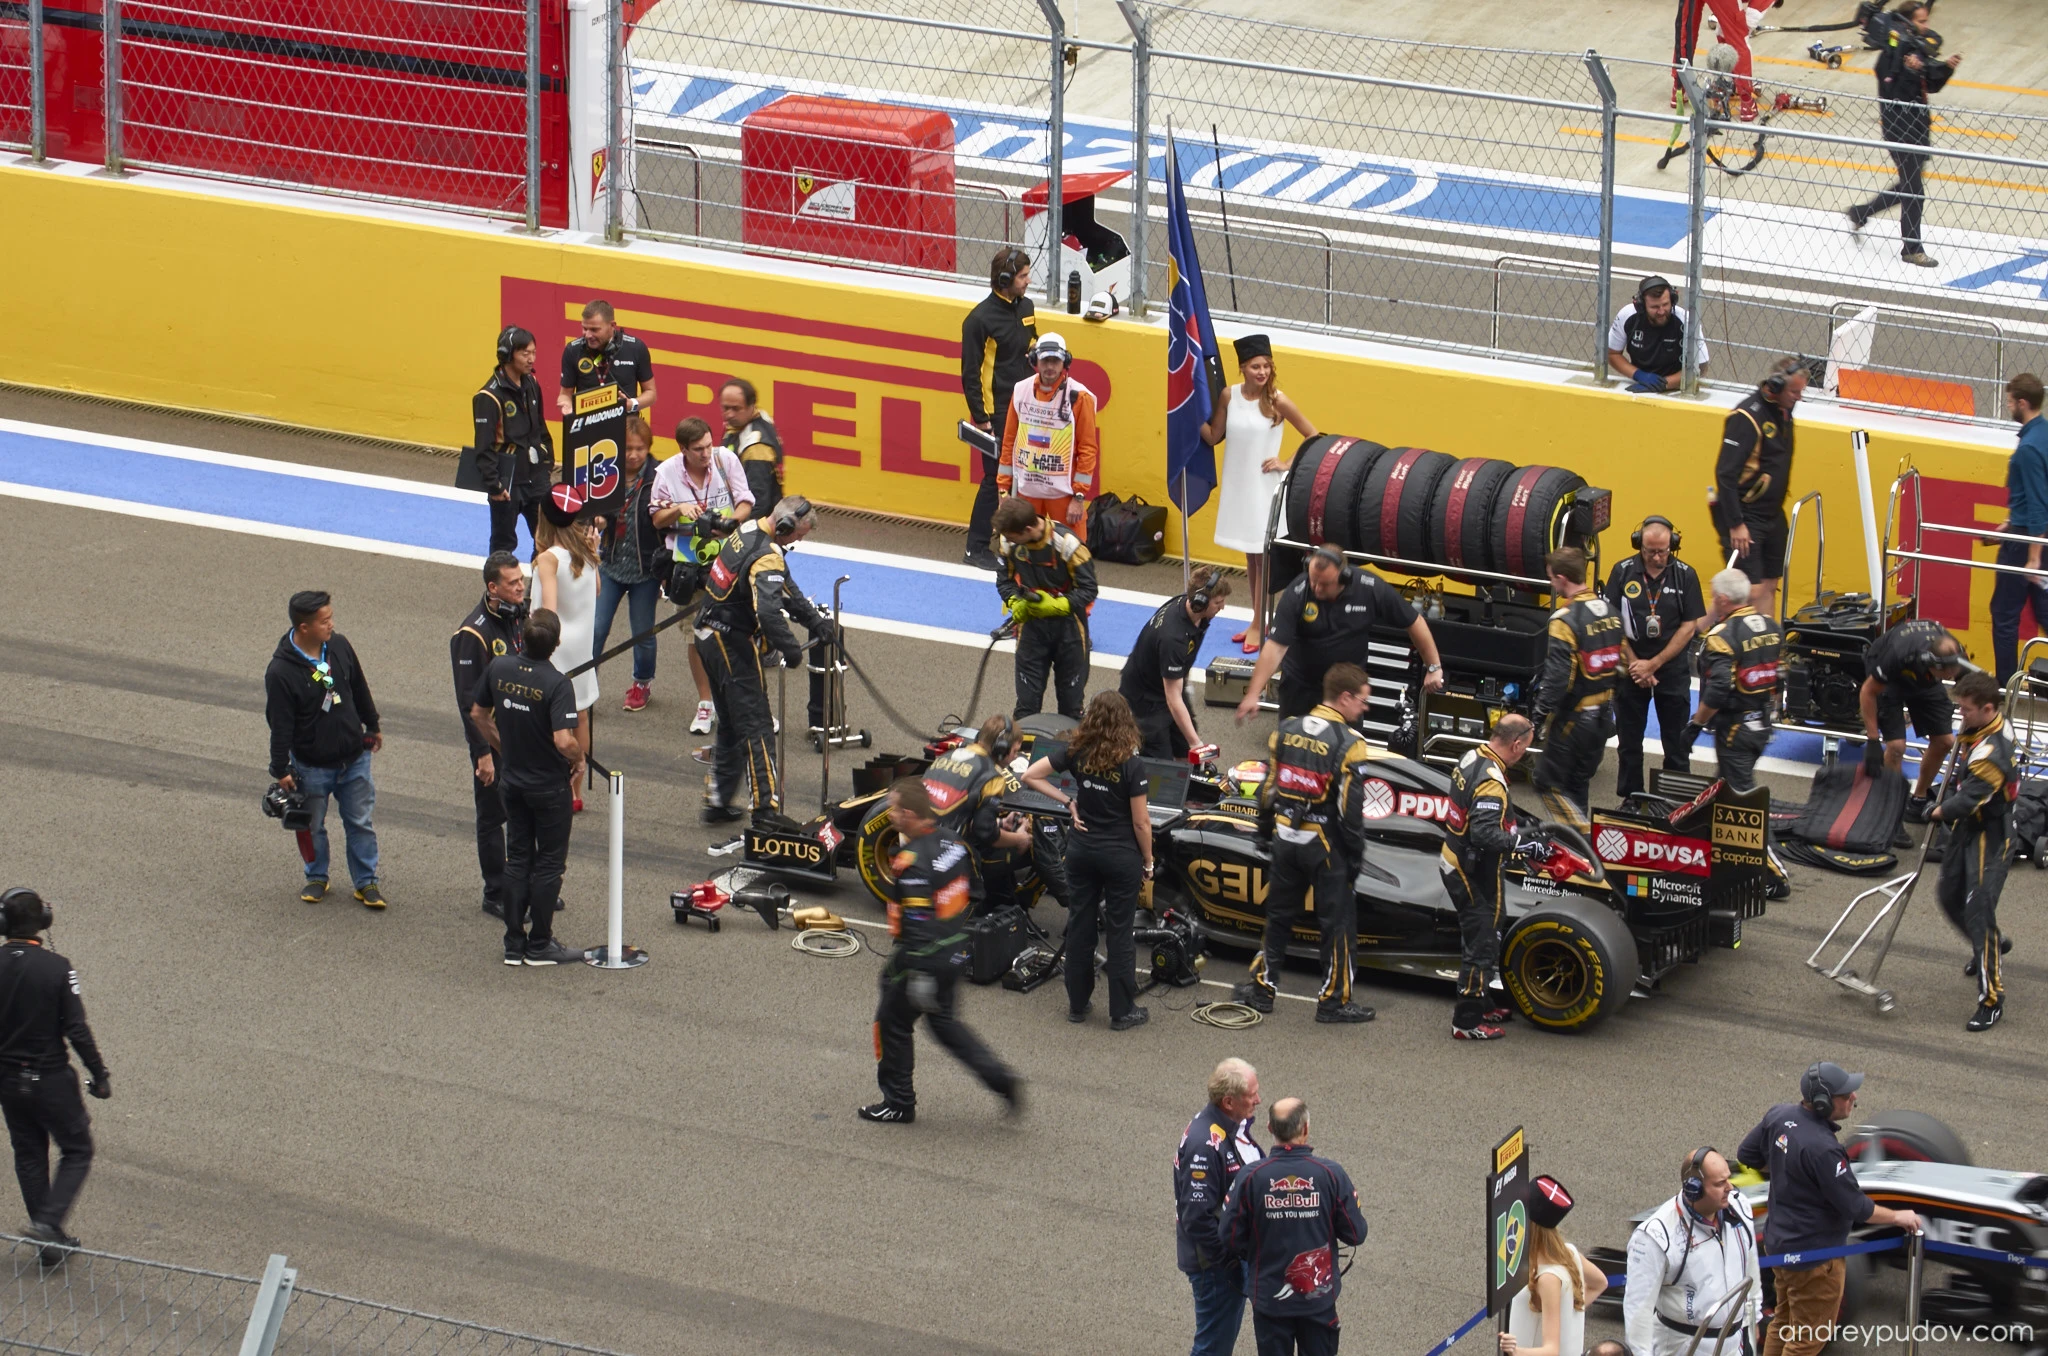 2015 Formula 1 Russian Grand Prix - Mechanics and engineers on the grid prior to the start of the race.